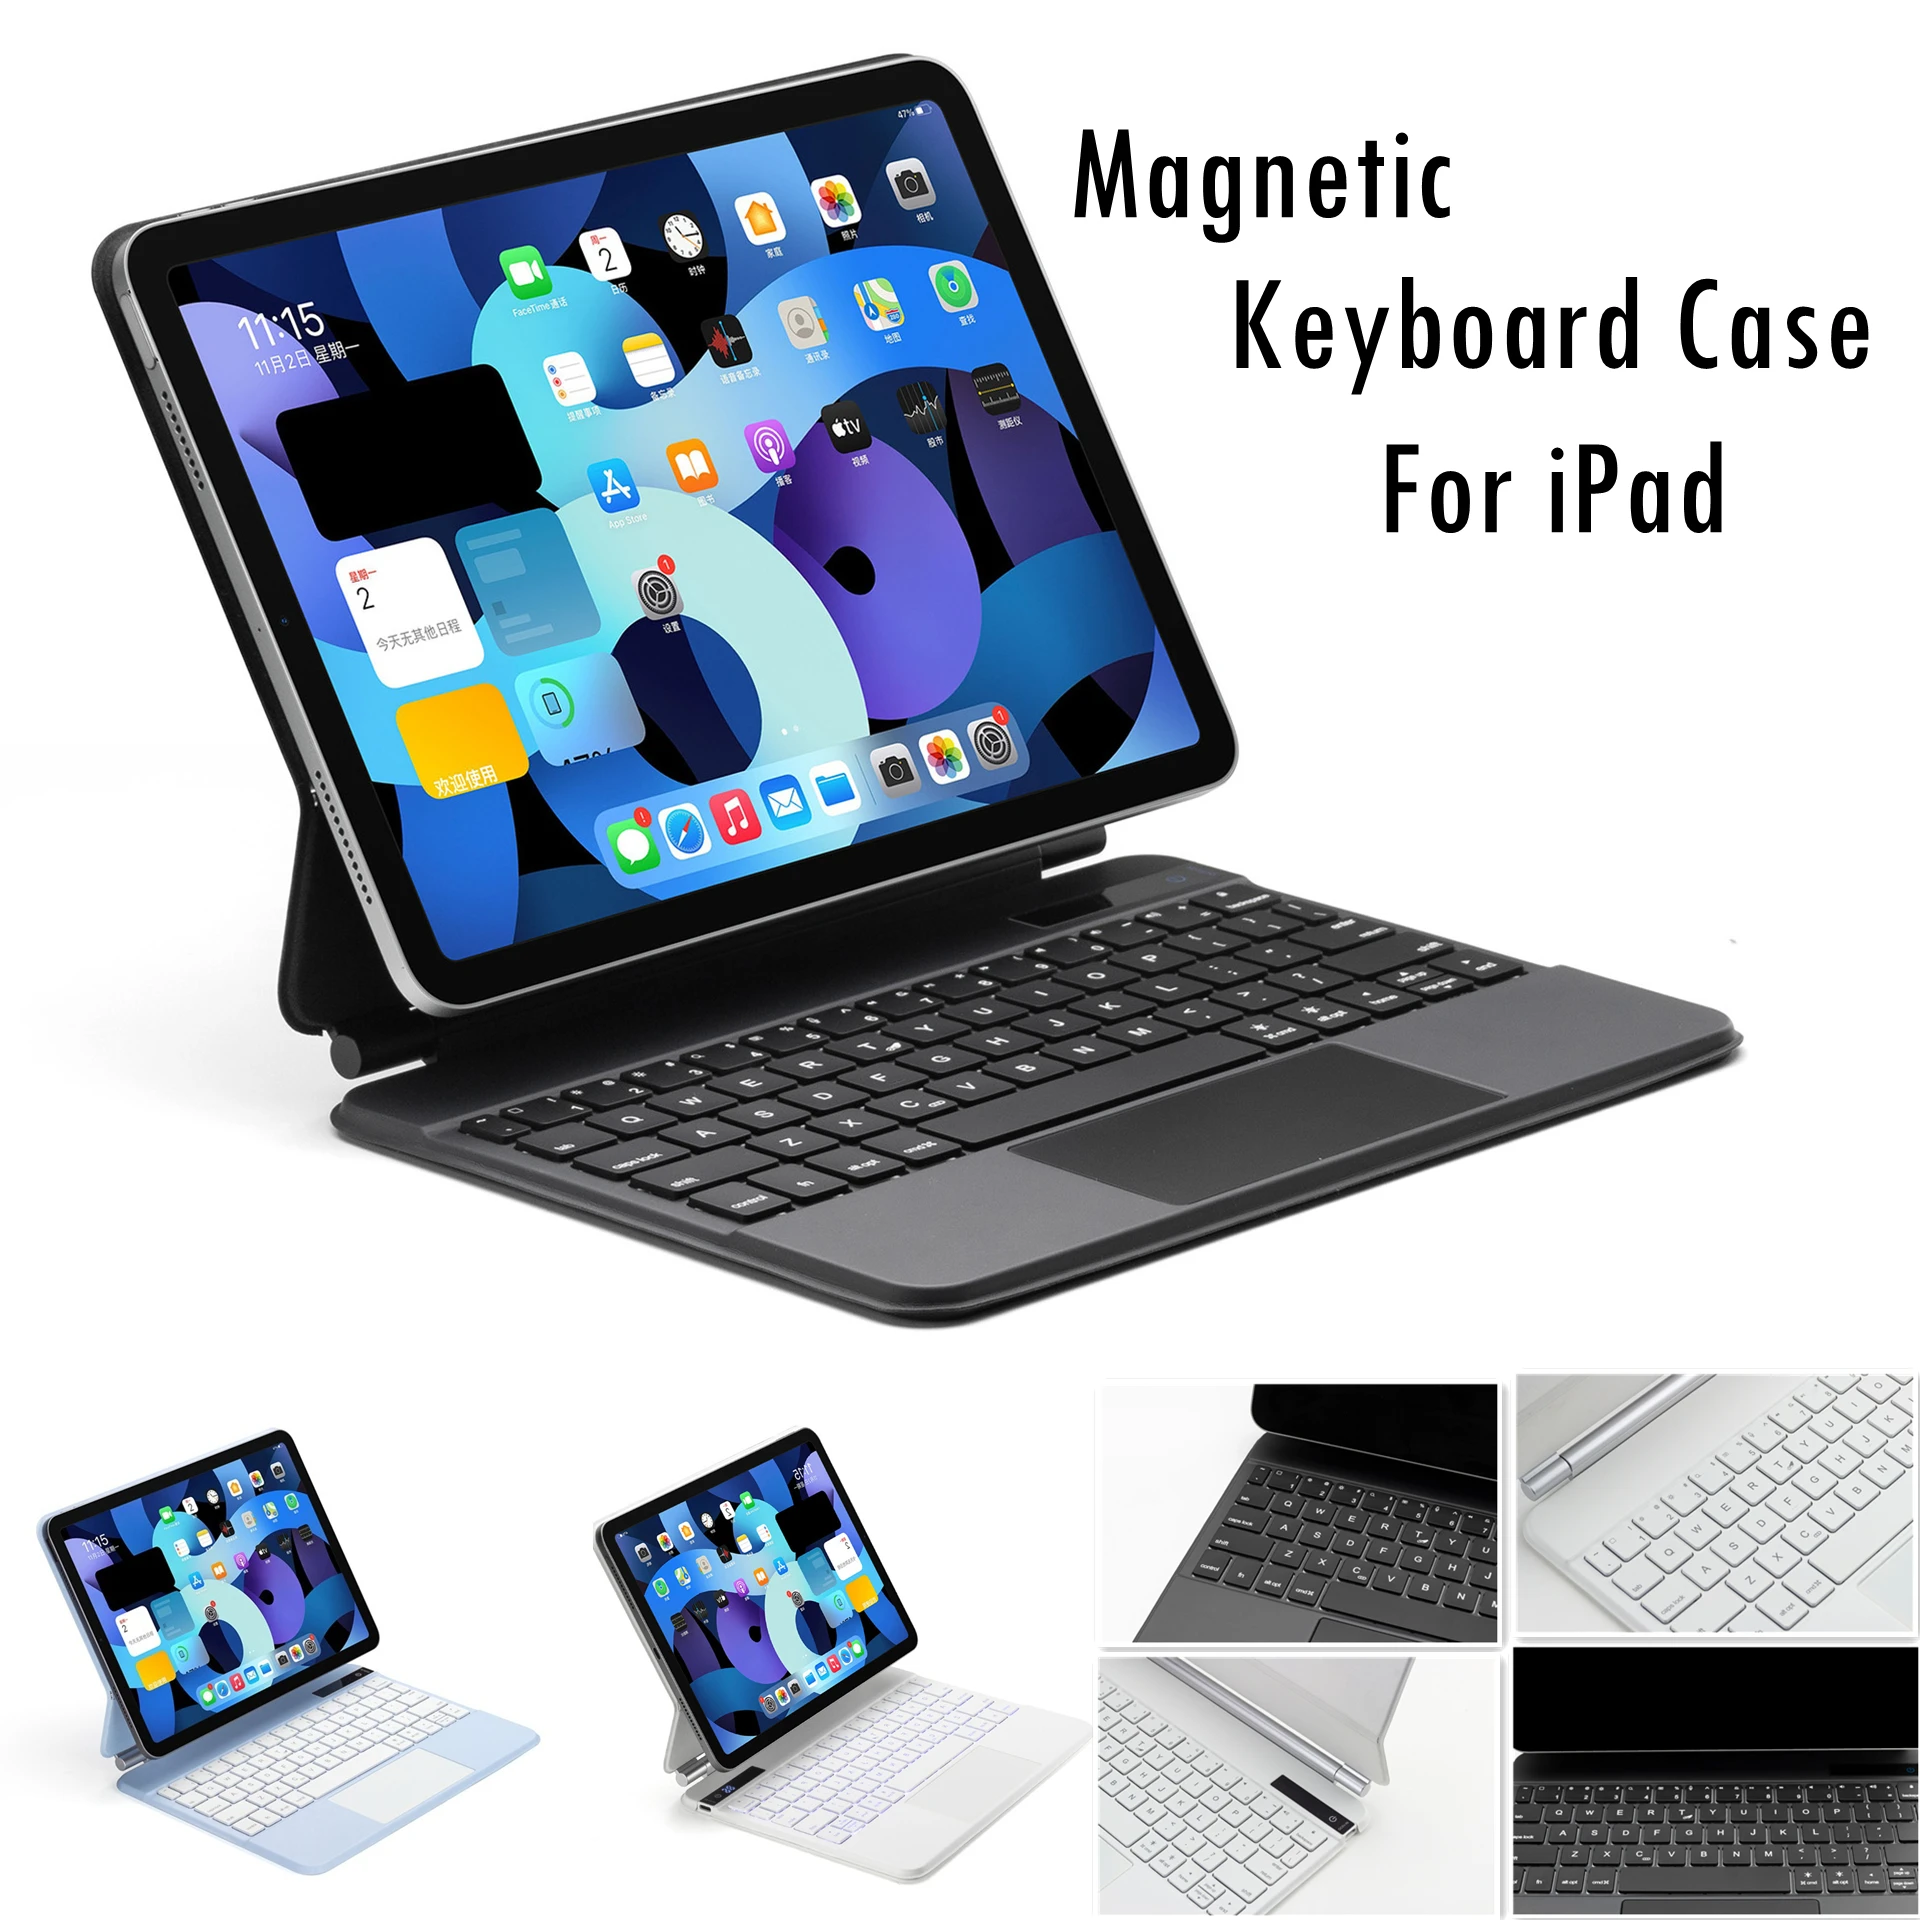 Magnetic keyboard case with touchpad for iPad pro11 pro12.9 air5 air4 magic control bluetooth protective shell wireless keyboard iphone 12 pro max leather case